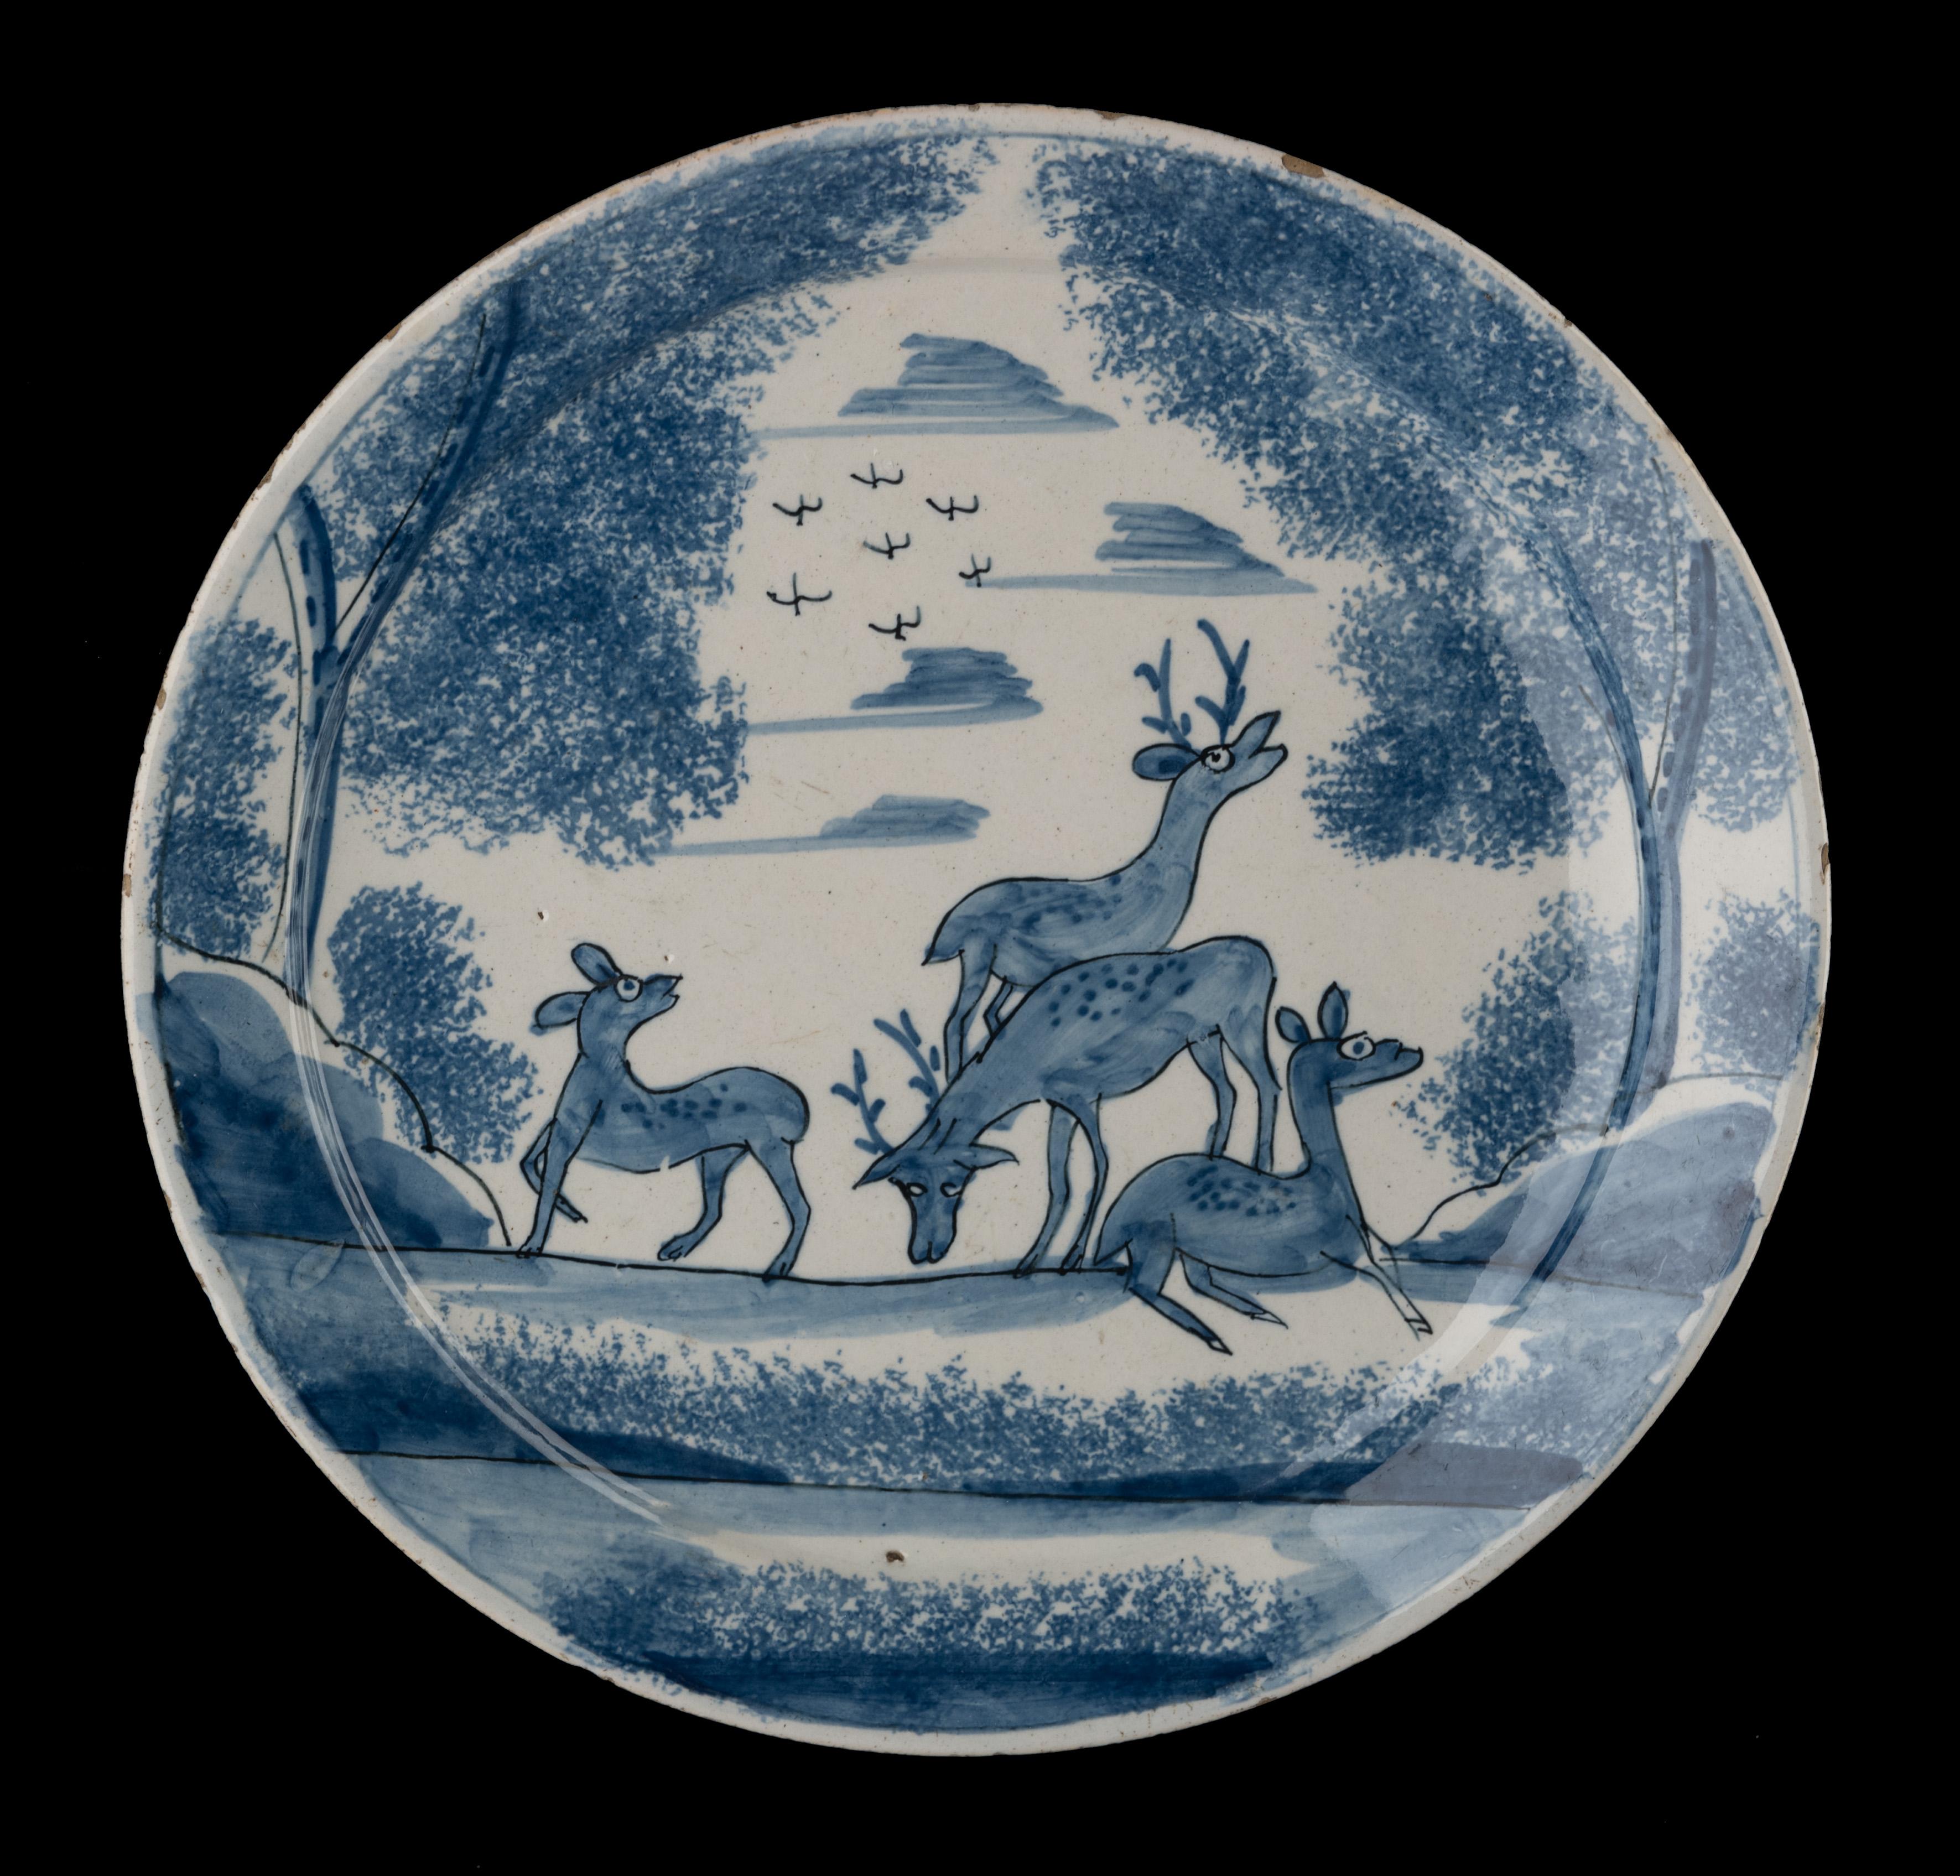 Blue and white plate with deer in a landscape  Delft, circa 1700

The plate has a narrow, flat flange and is painted in blue with a landscape with four deer between trees. Birds fly in the sky. The foliage of the trees is sponged.

Dimensions: